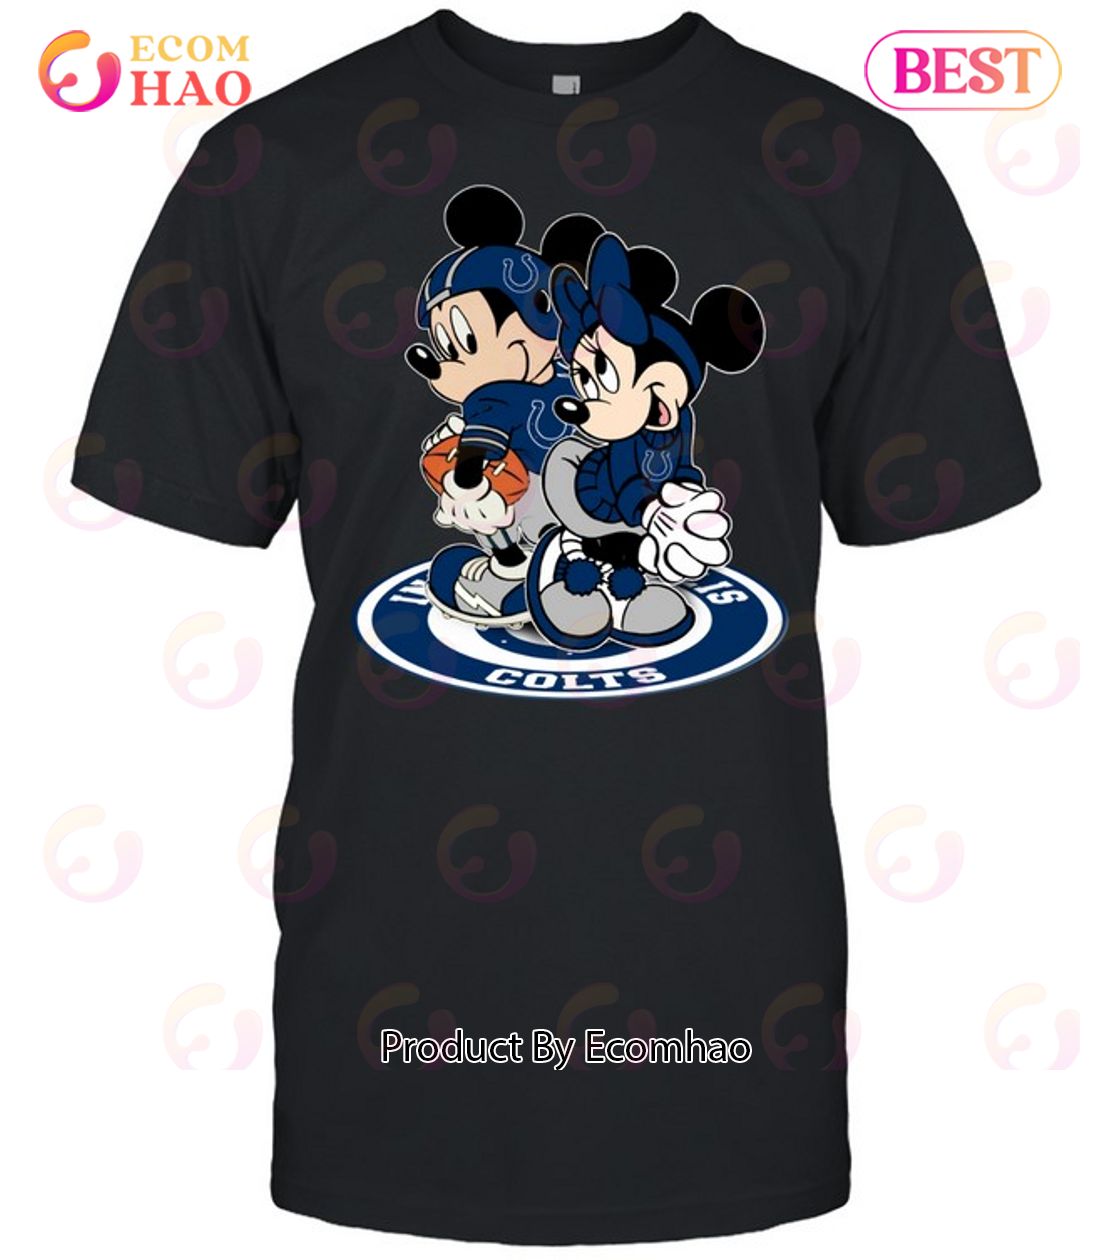 NFL Indianapolis Colts Mickey & Minnie T-Shirt